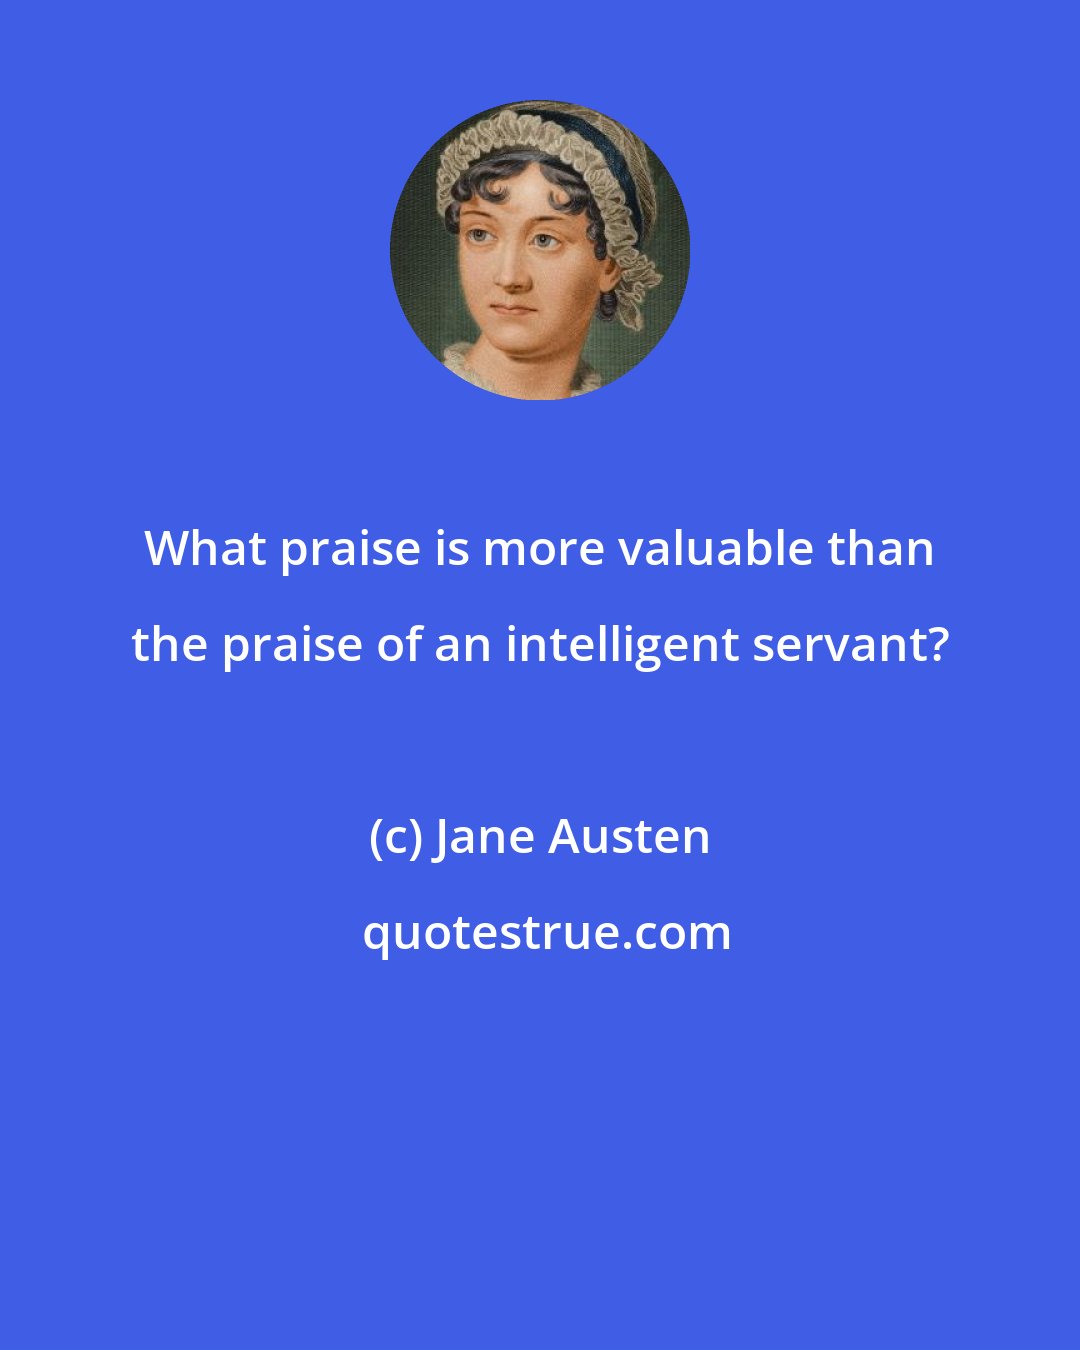 Jane Austen: What praise is more valuable than the praise of an intelligent servant?